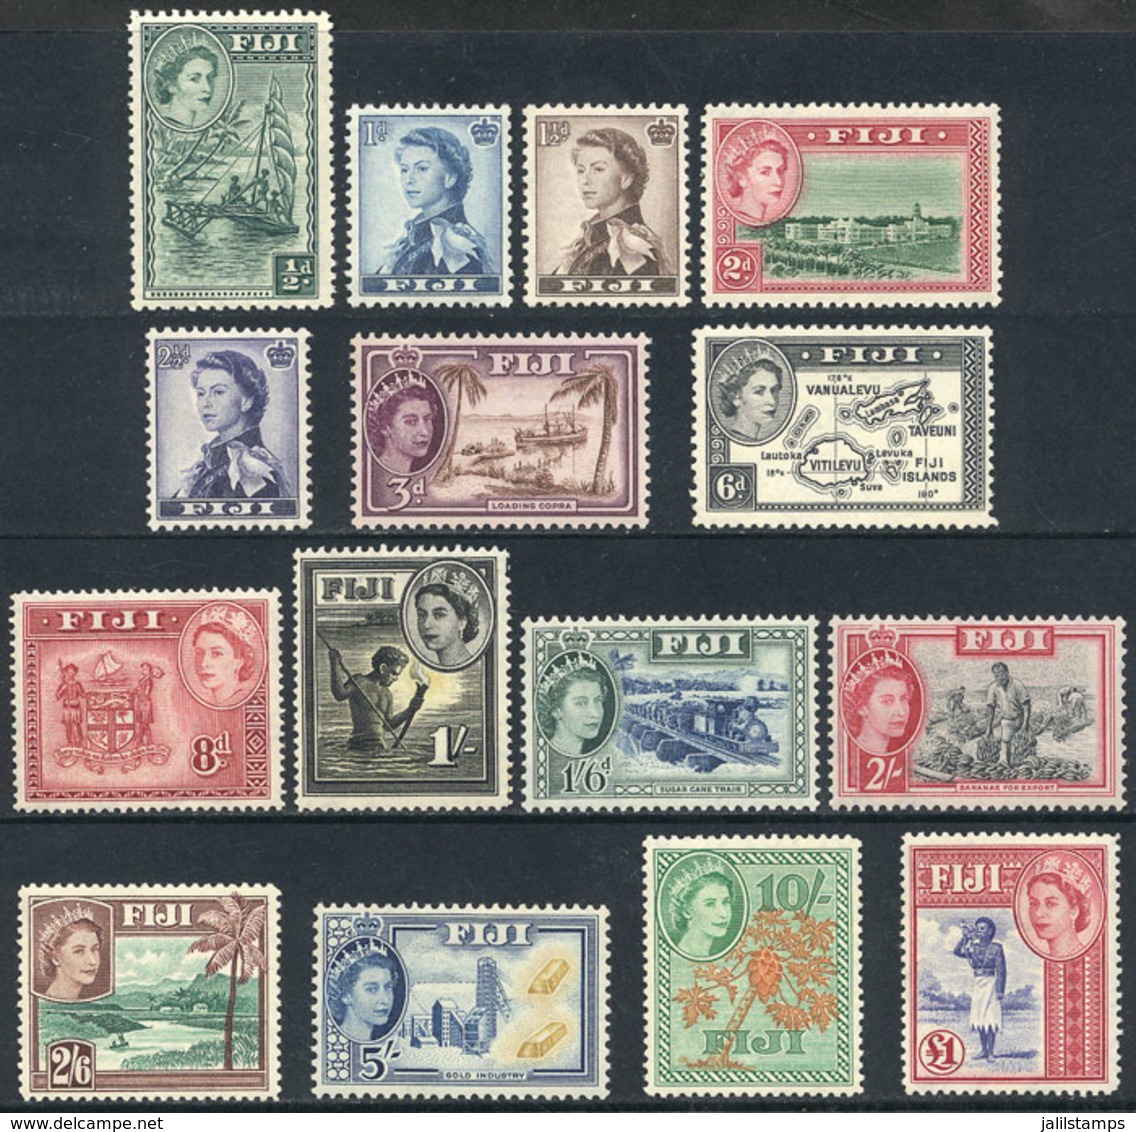 FIJI: Sc.147/162, 1954/6 Elizabeth And Other Topics, Compl. Set Of 15 Mint Values, Most Unmounted (2 Or 3 Very Lightly H - Fiji (...-1970)